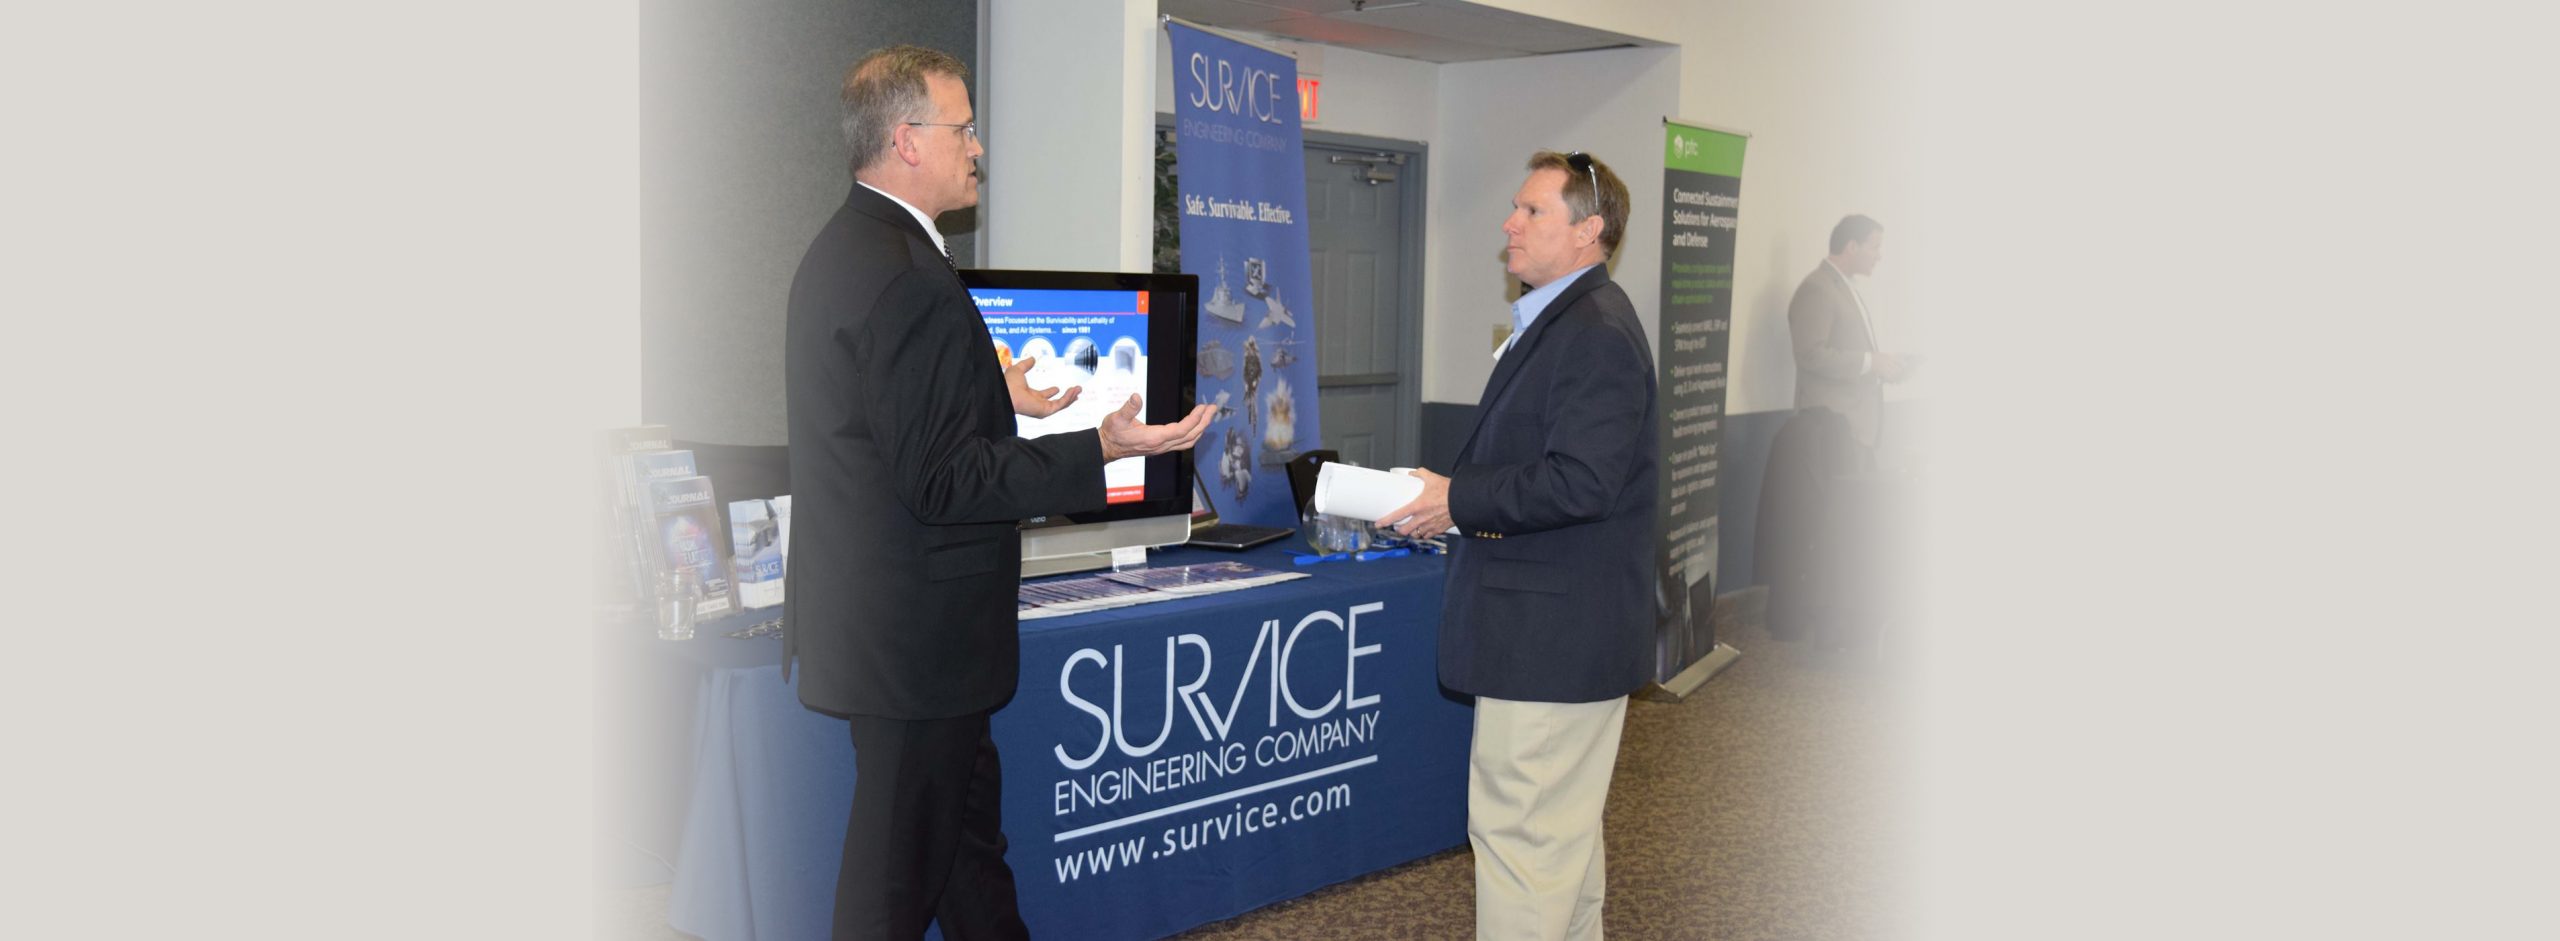 DAO manager, Ron Dextor at SURVICE booth